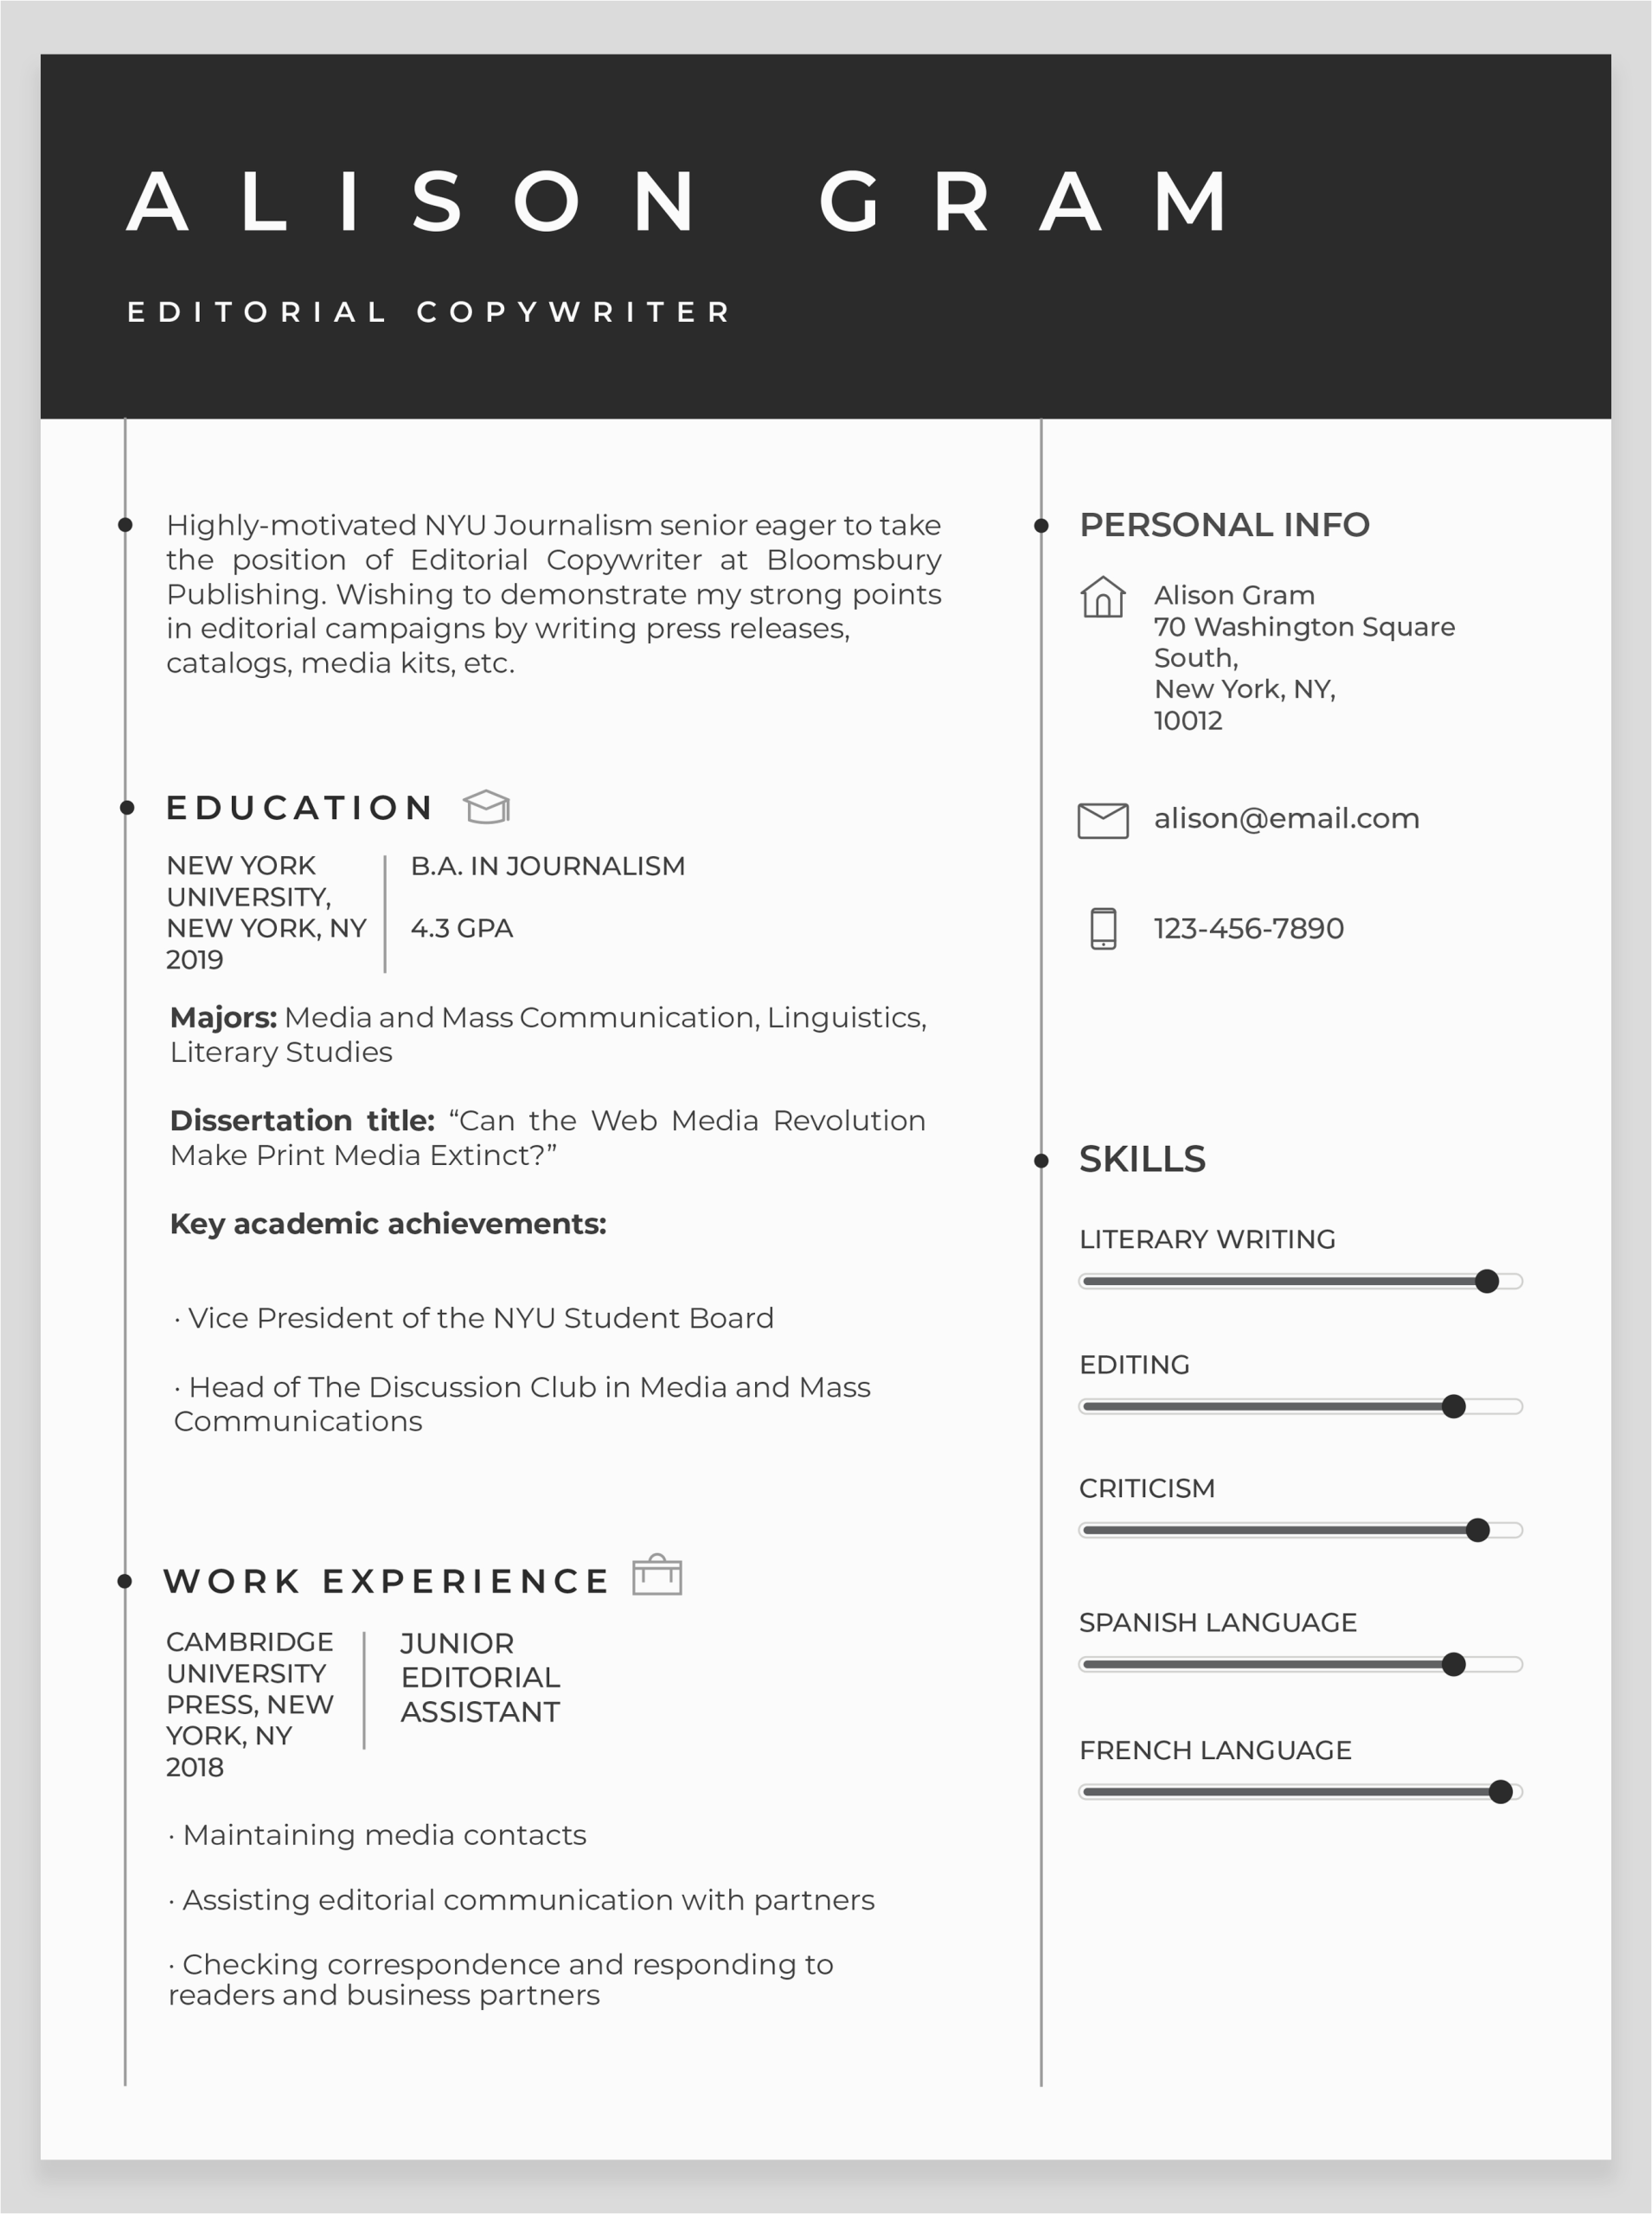 Sample Resume where I Can Utilize My How to Make A Stunning Resume [cv Template Inside]